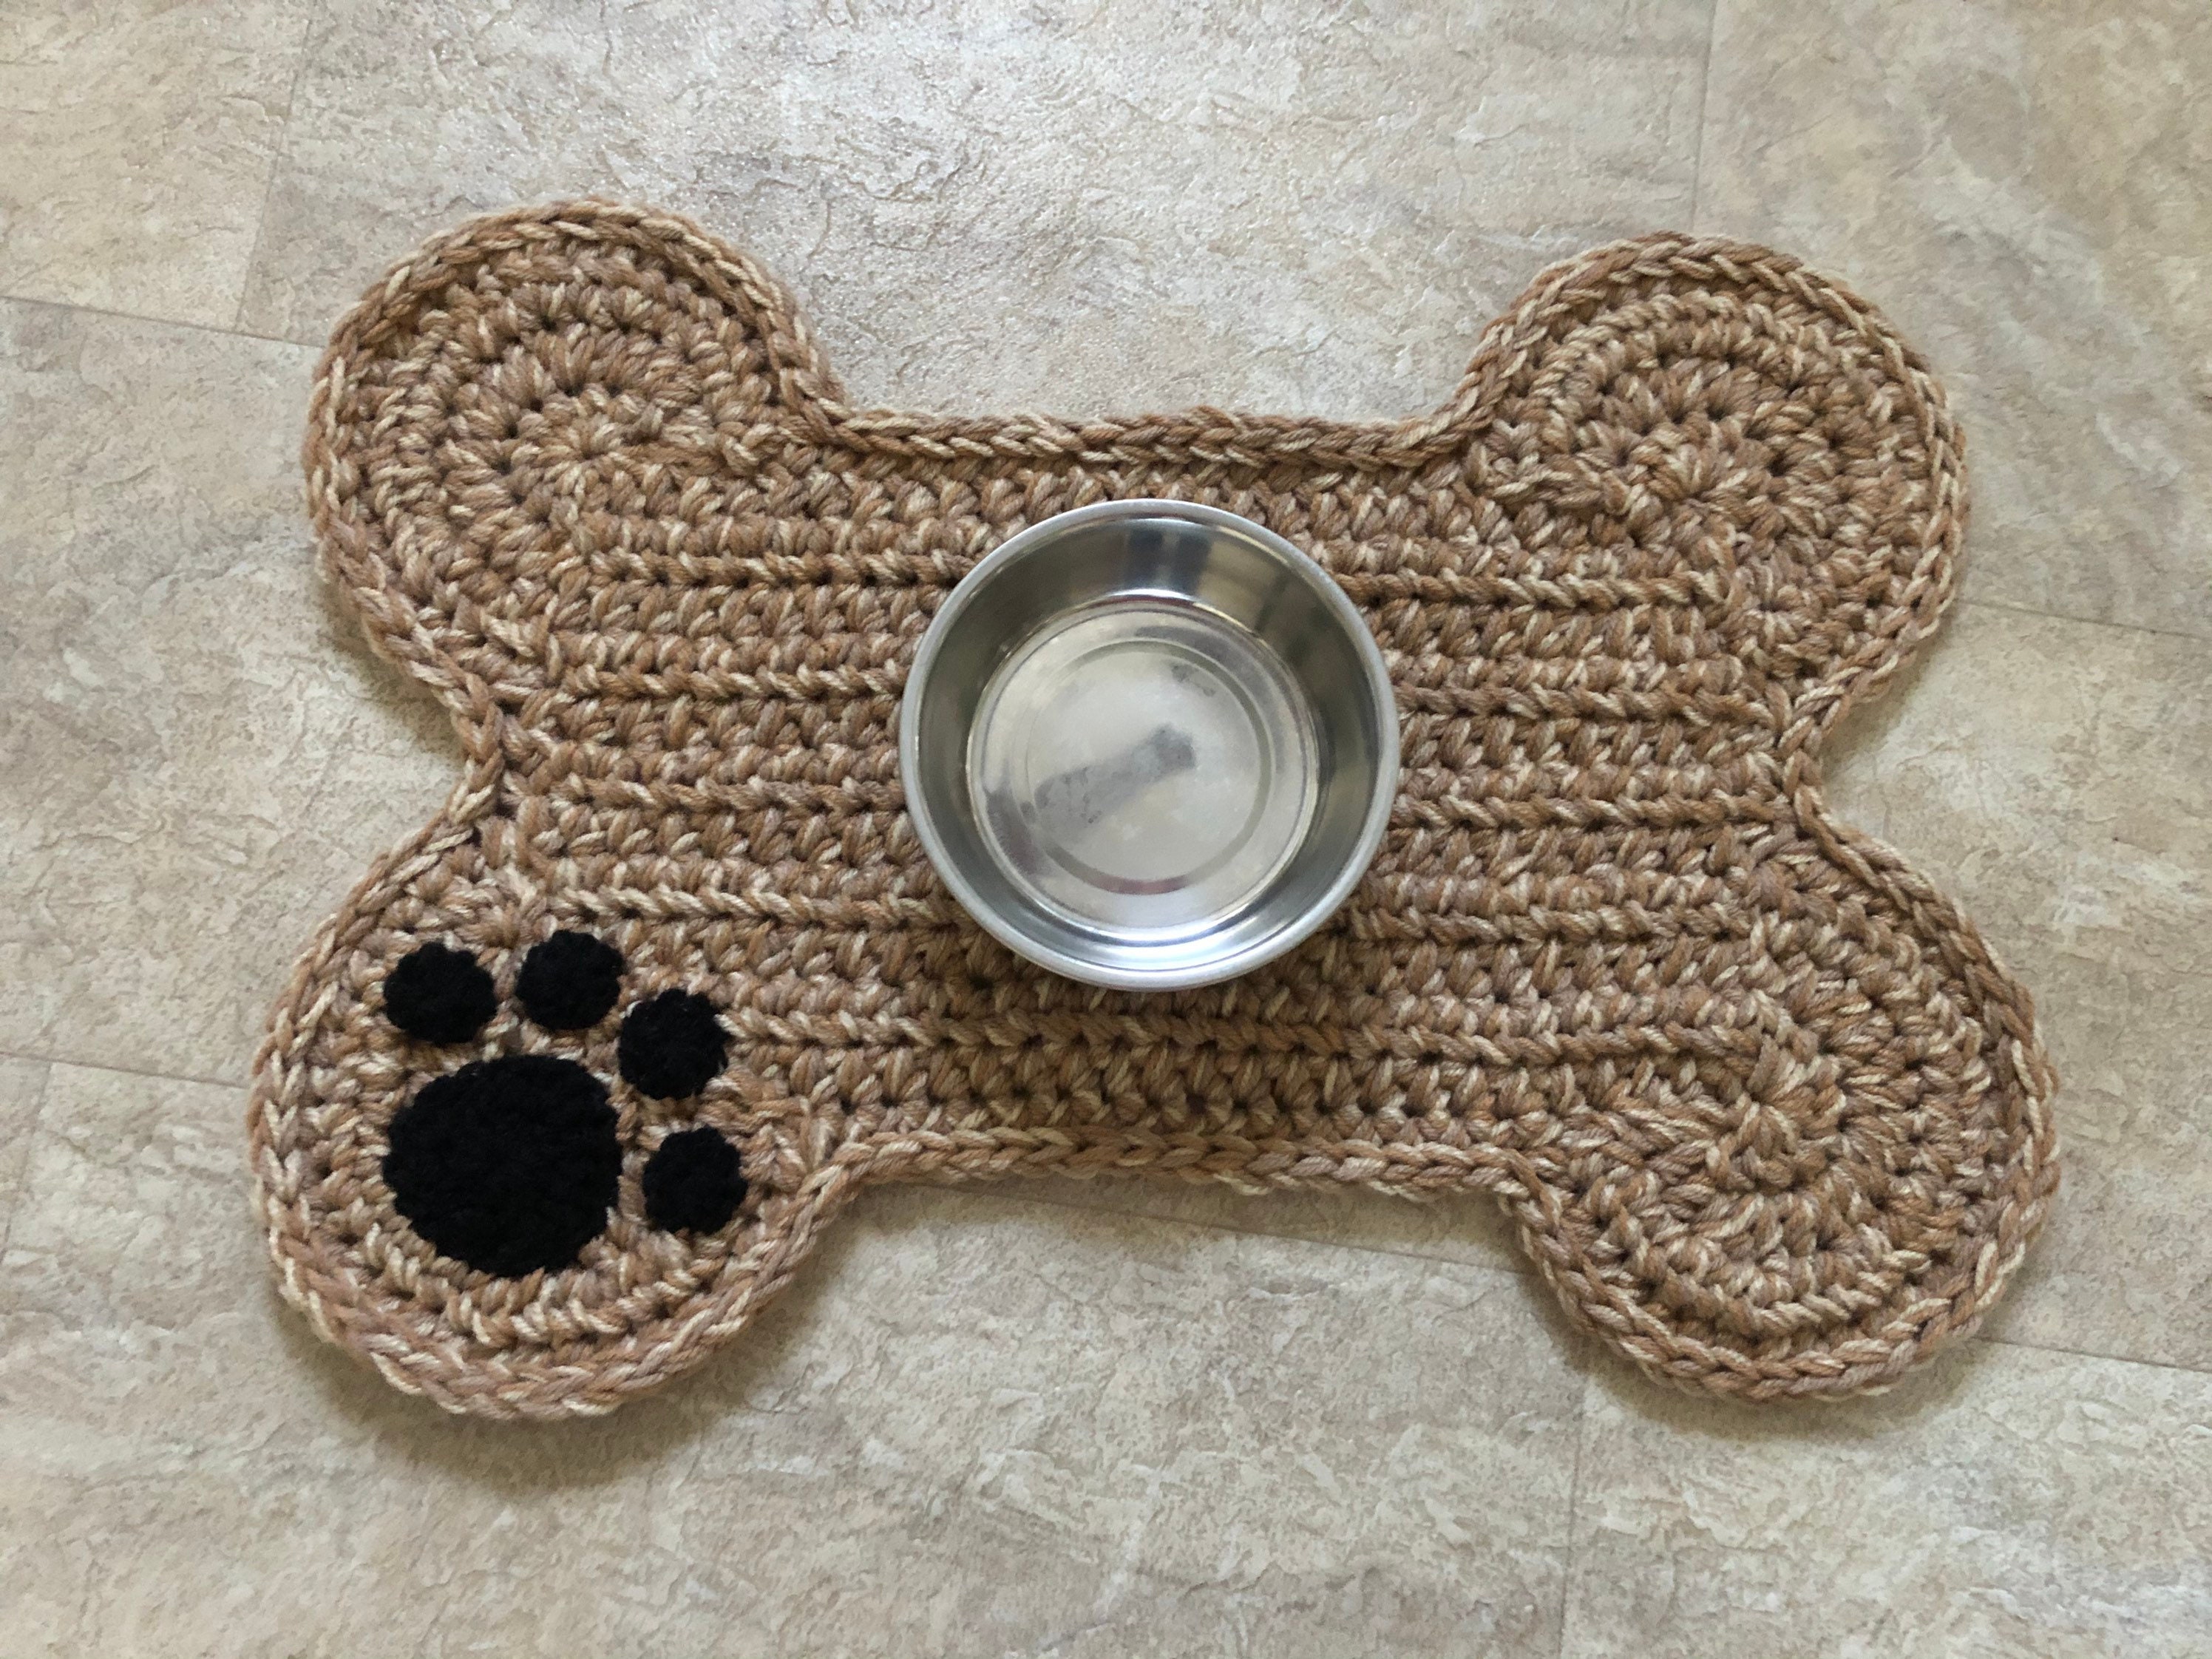 RESILIA Bone Shaped Dog Food Bowl Placemat - Non-Slip Design, Machine  Washable, Puppy Feeding Pad, Protects Floors from Water Spills, Novelty Pet  Accessories, 29.5 Inches X 18 Inches, Gray 